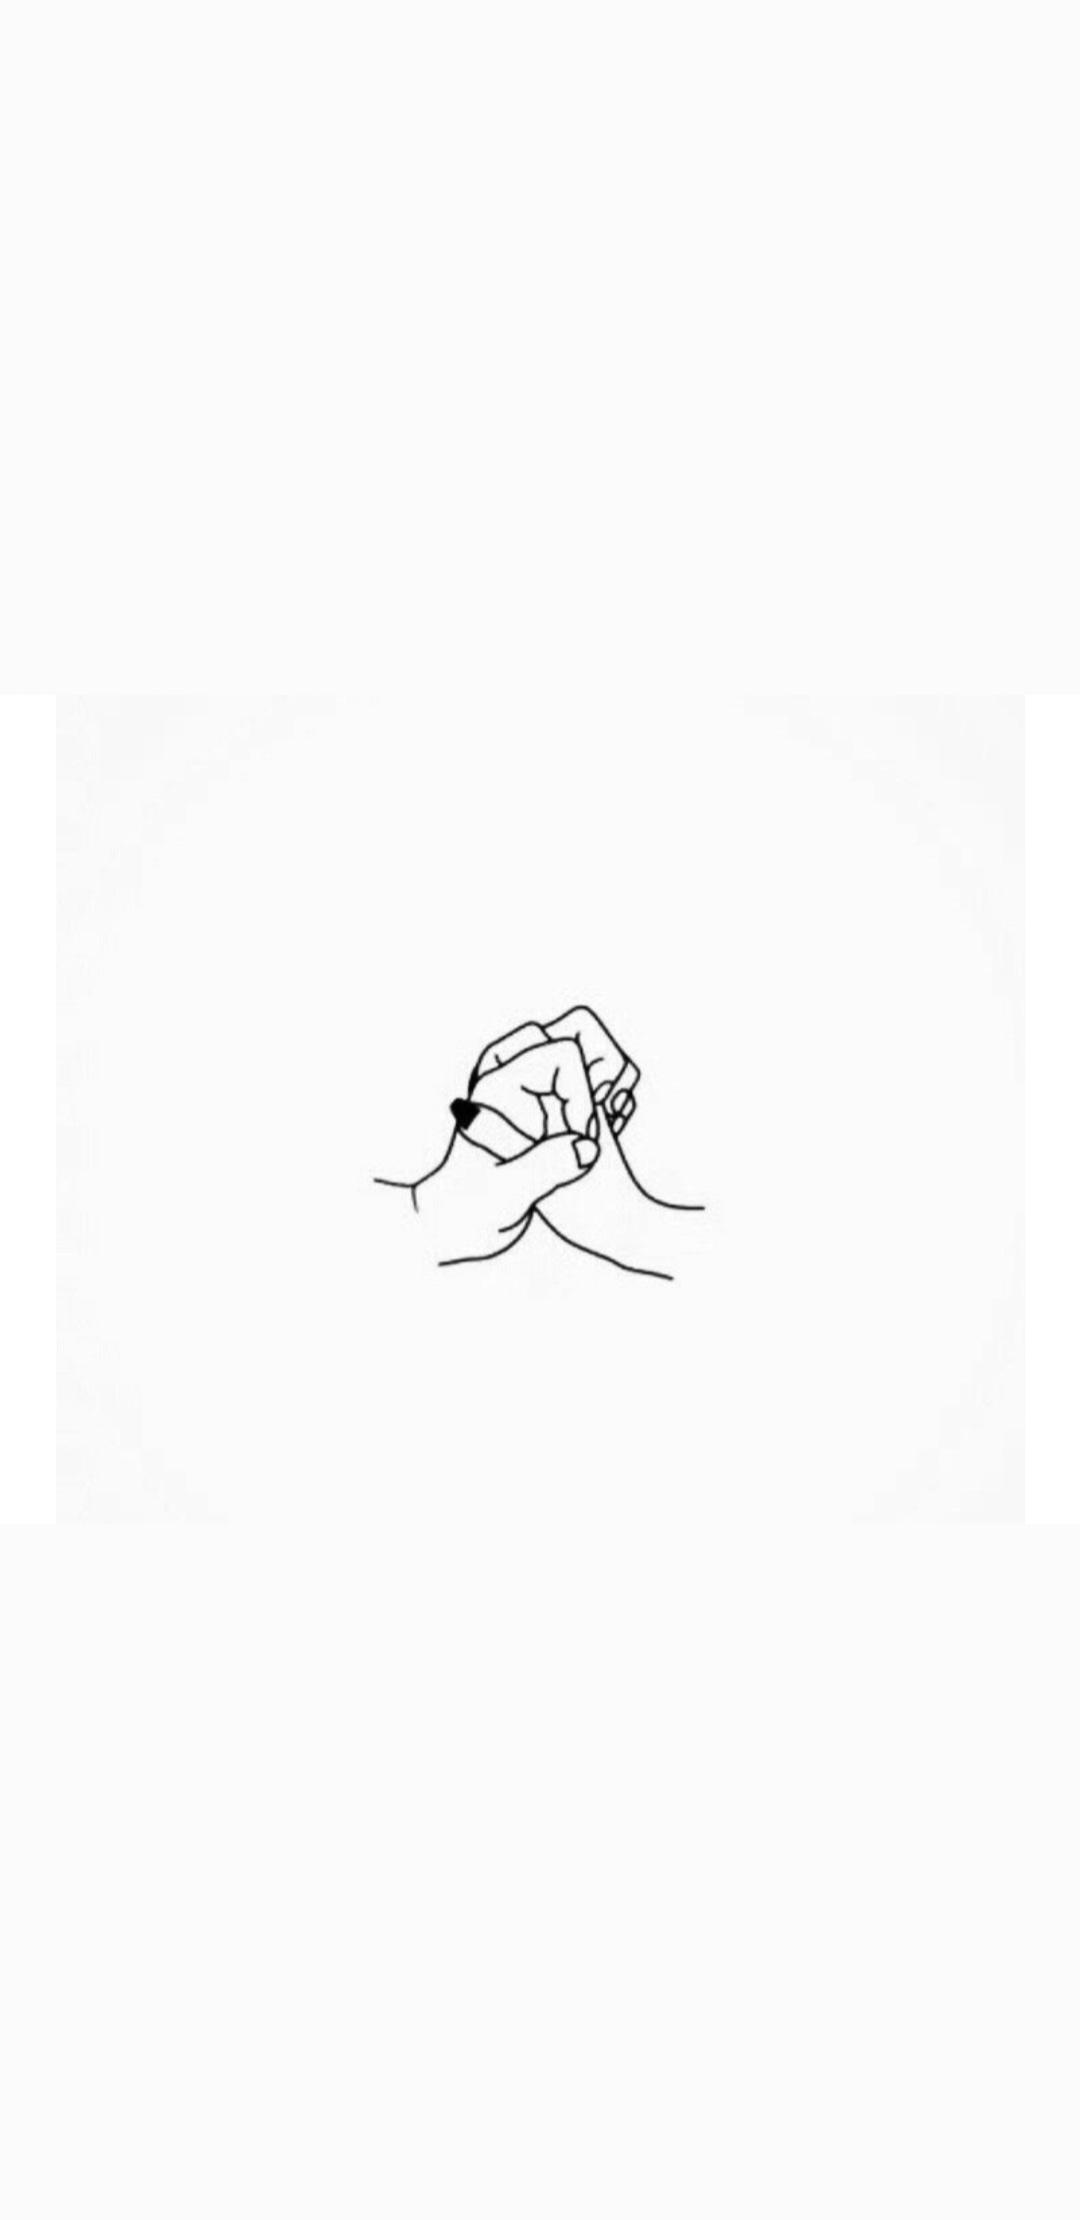 A black line drawing of two hands holding a diamond on a white background - Cute white